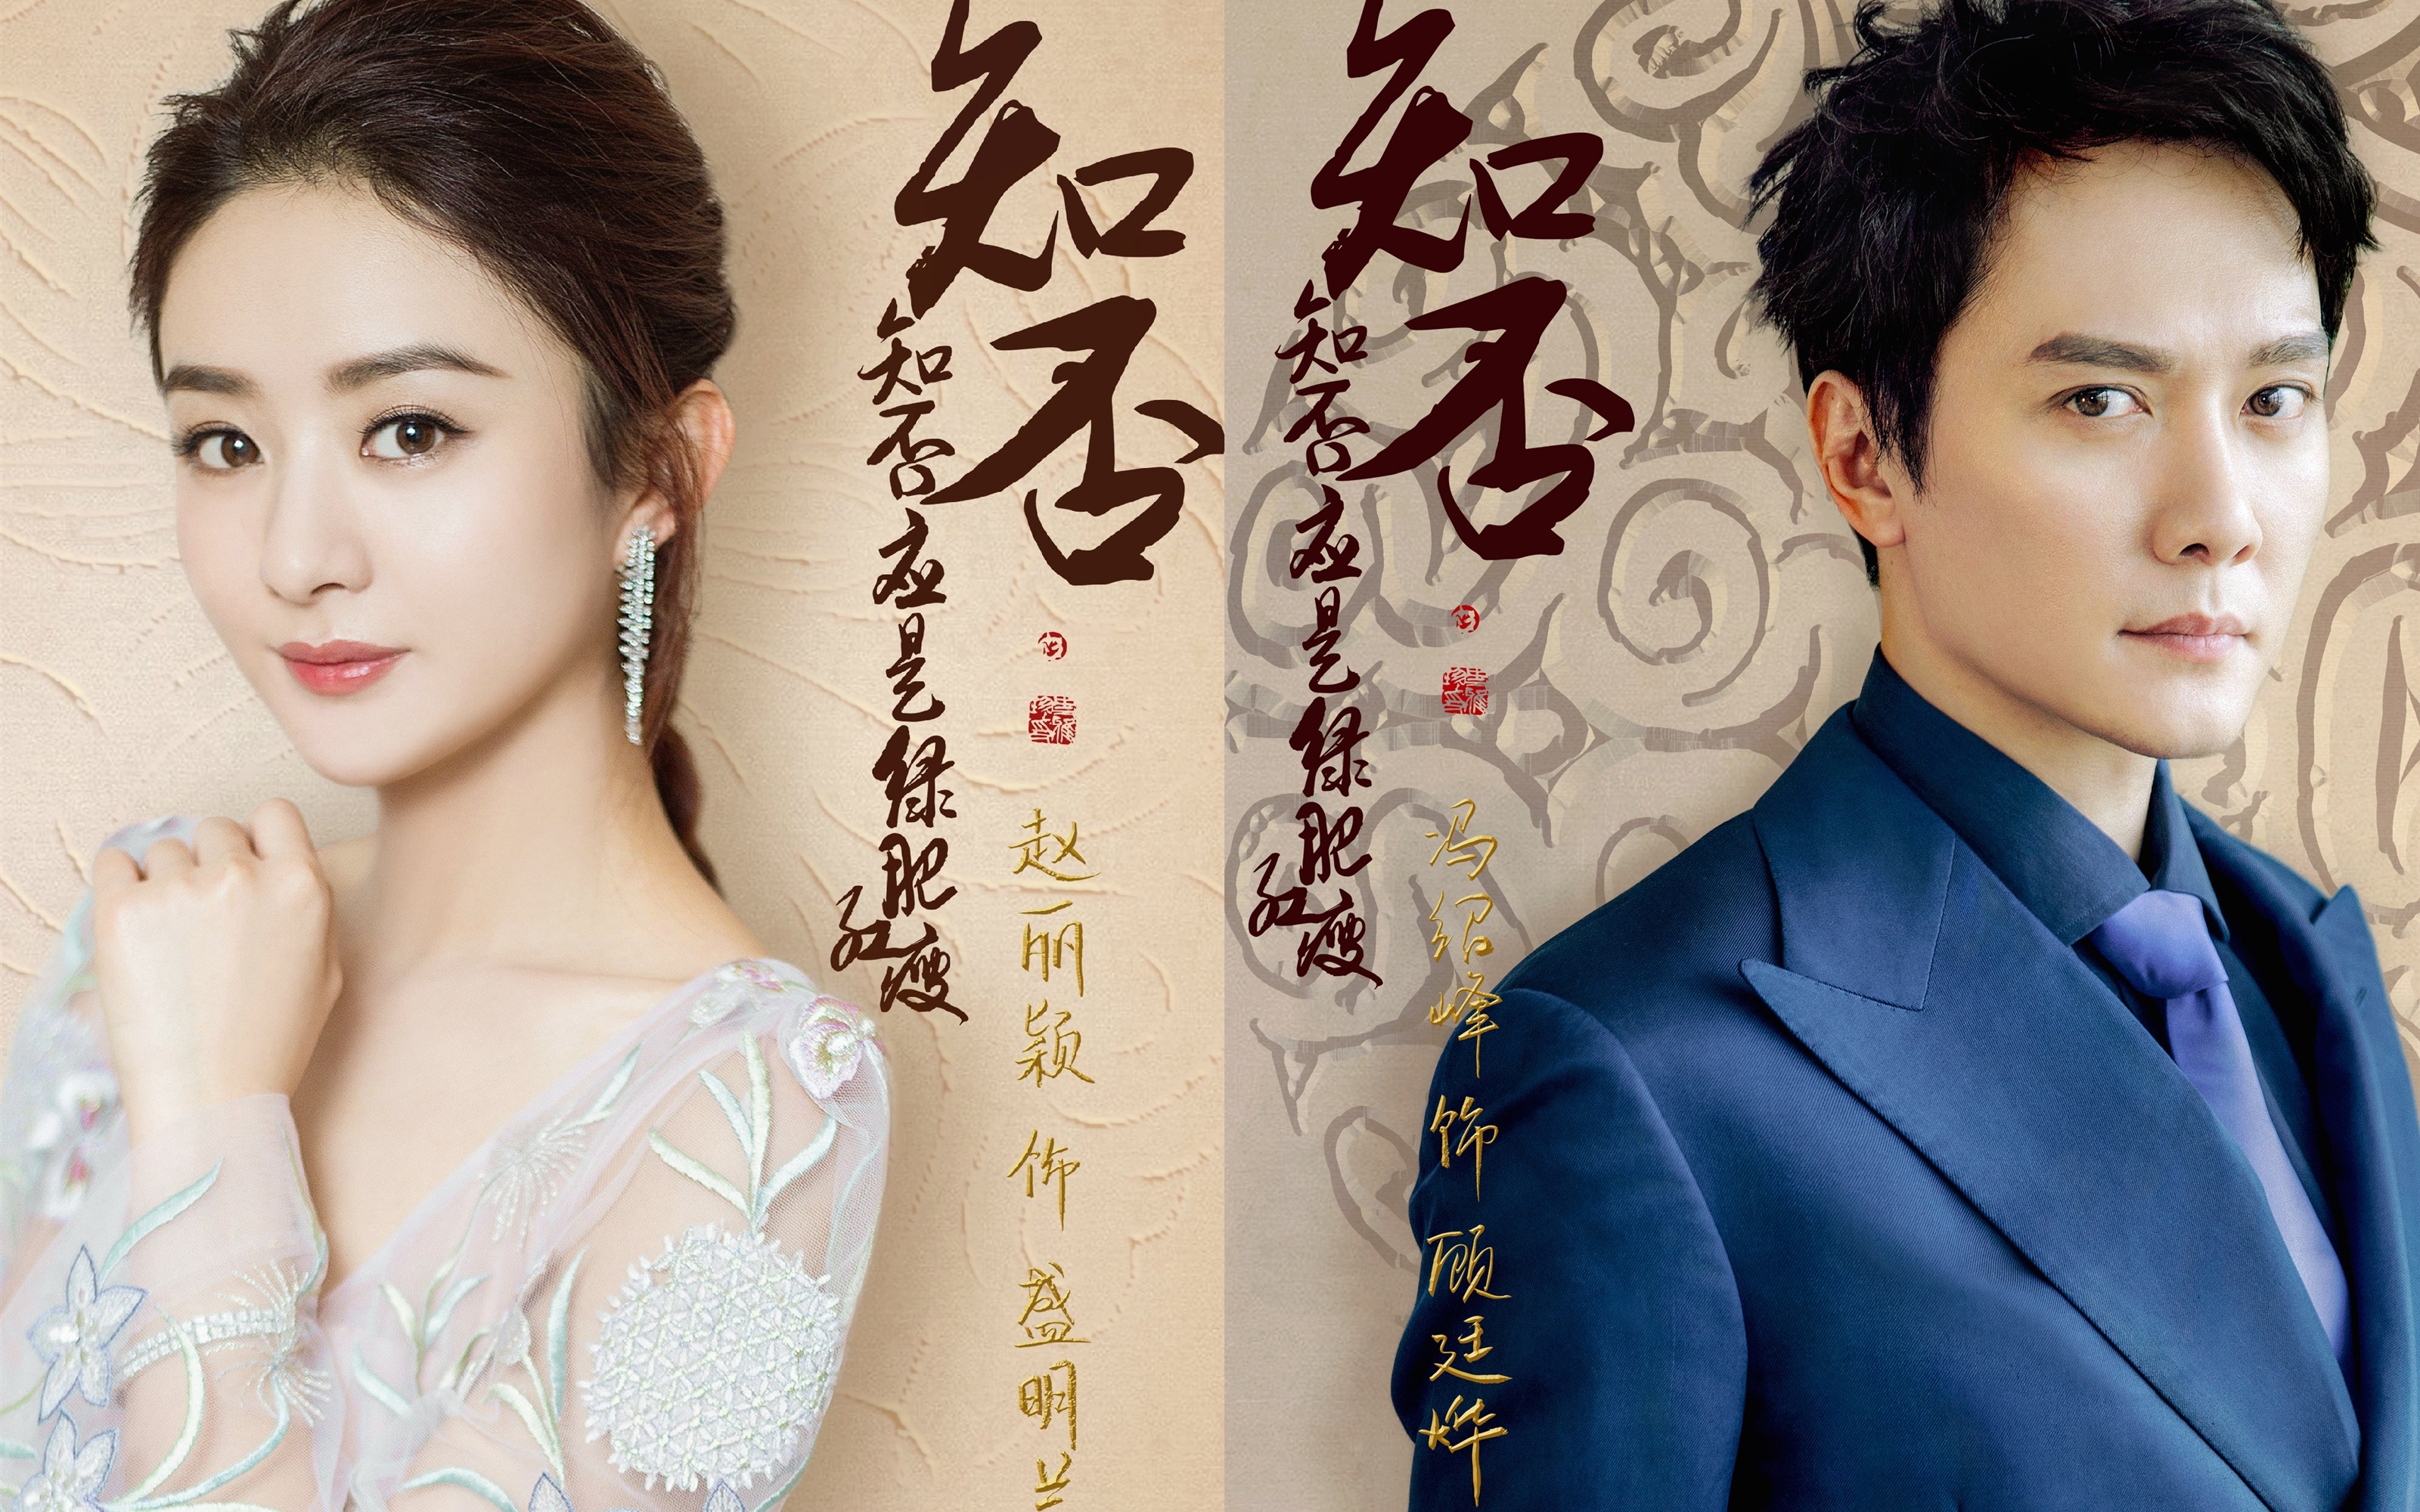 The Story Of MingLan, TV series HD wallpapers #46 - 3200x2000